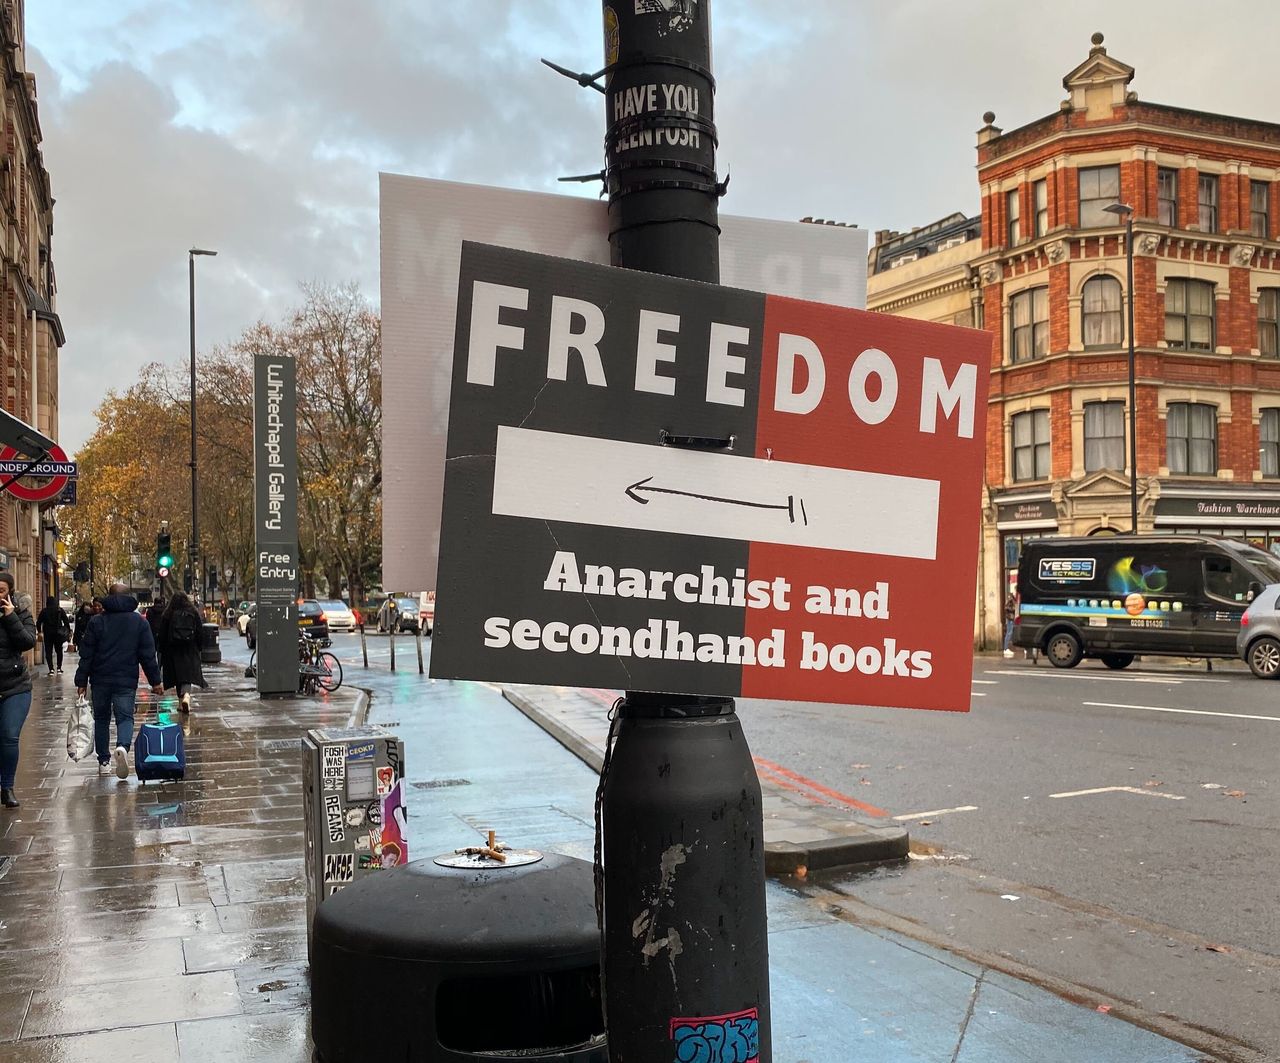 A sign for Freedom Press, an anarchist bookshop in Whitechapel 